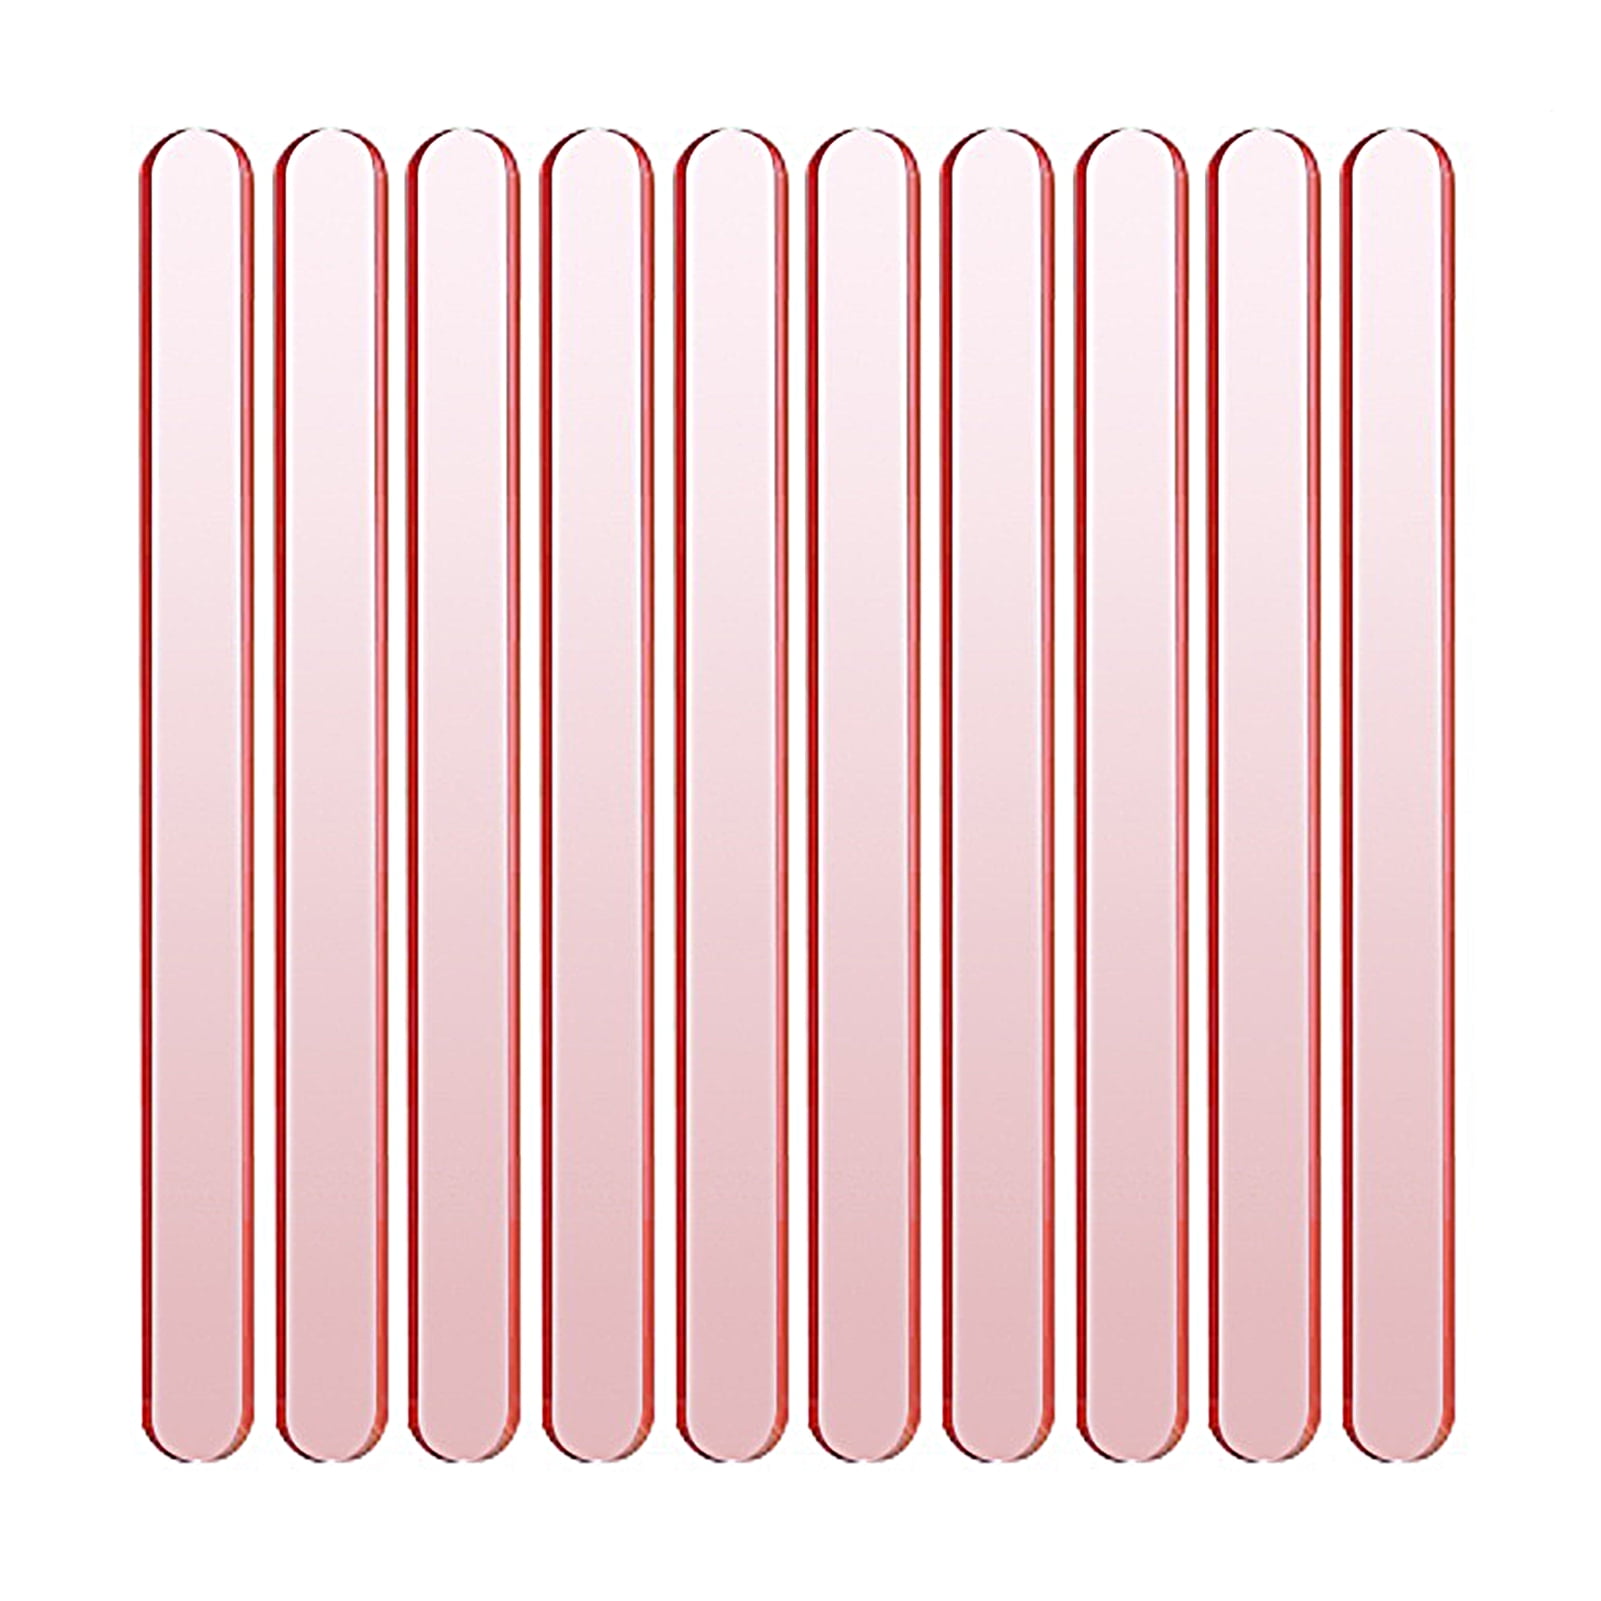 ACFENG 20pcs of Reusable Acrylic Sticks for Ice Cream,Popsicle,Kids Projects,Classrooms,Home,Party and More (White, 4.72’’ Long)